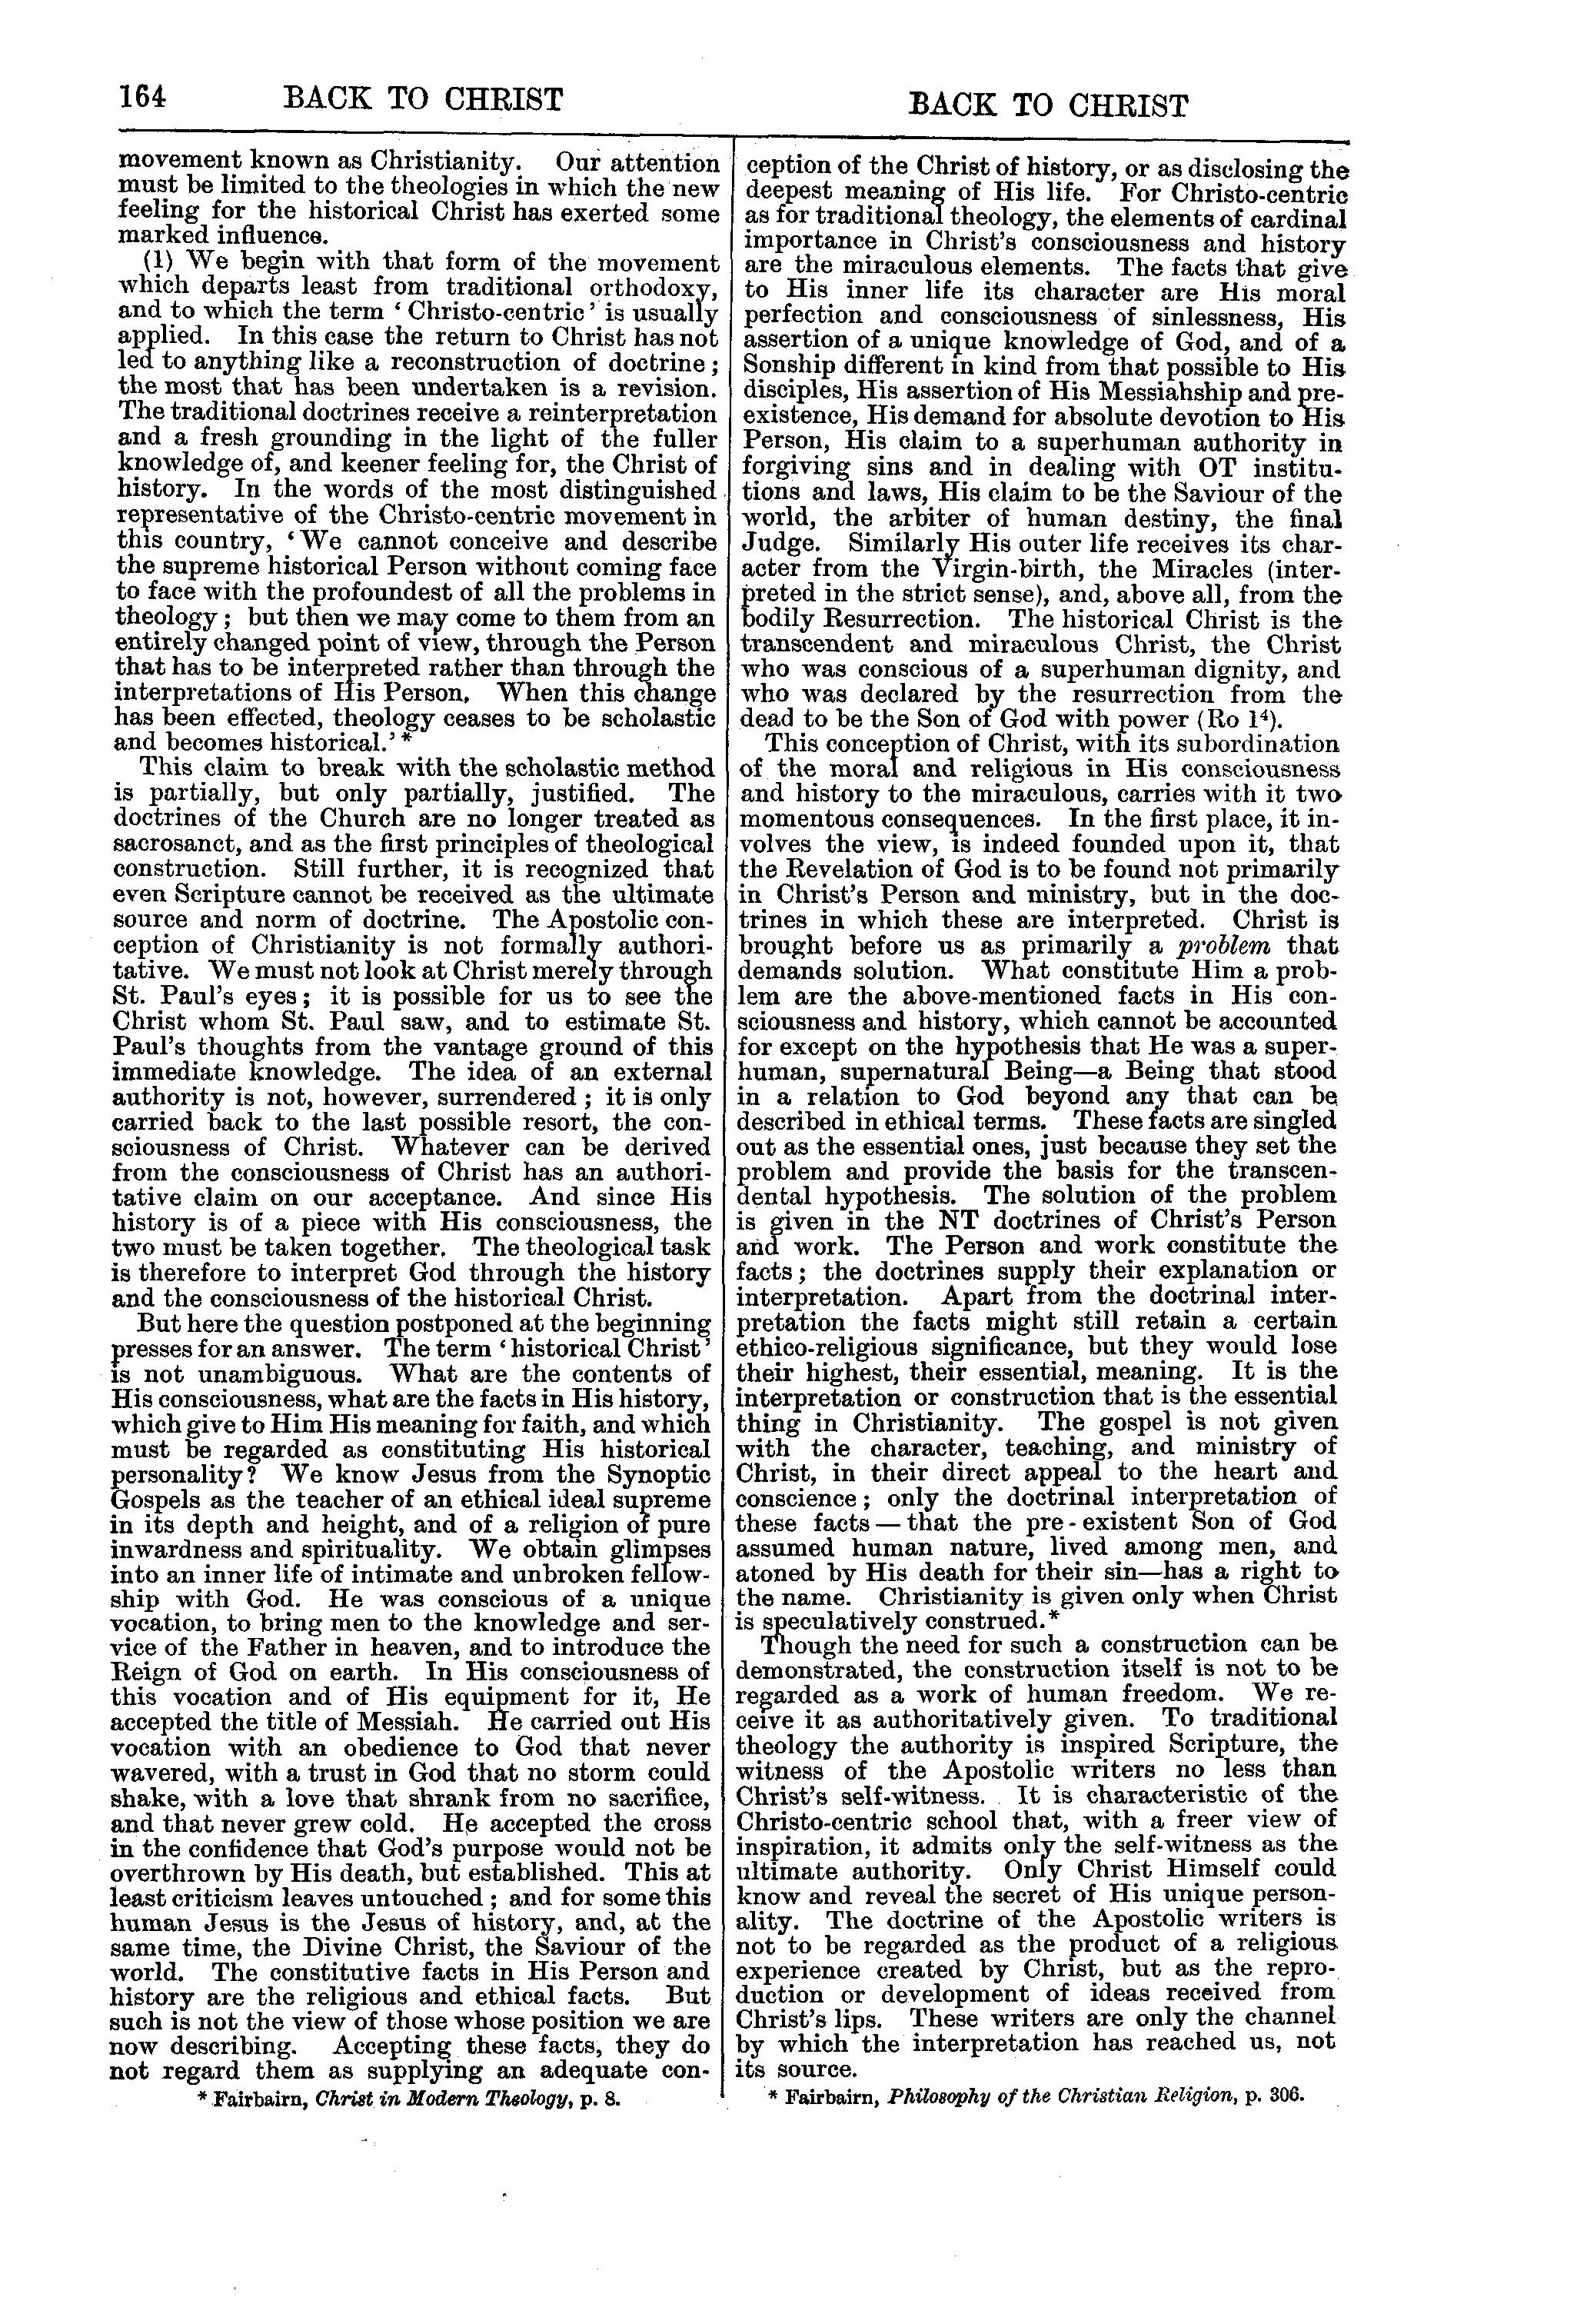 Image of page 164